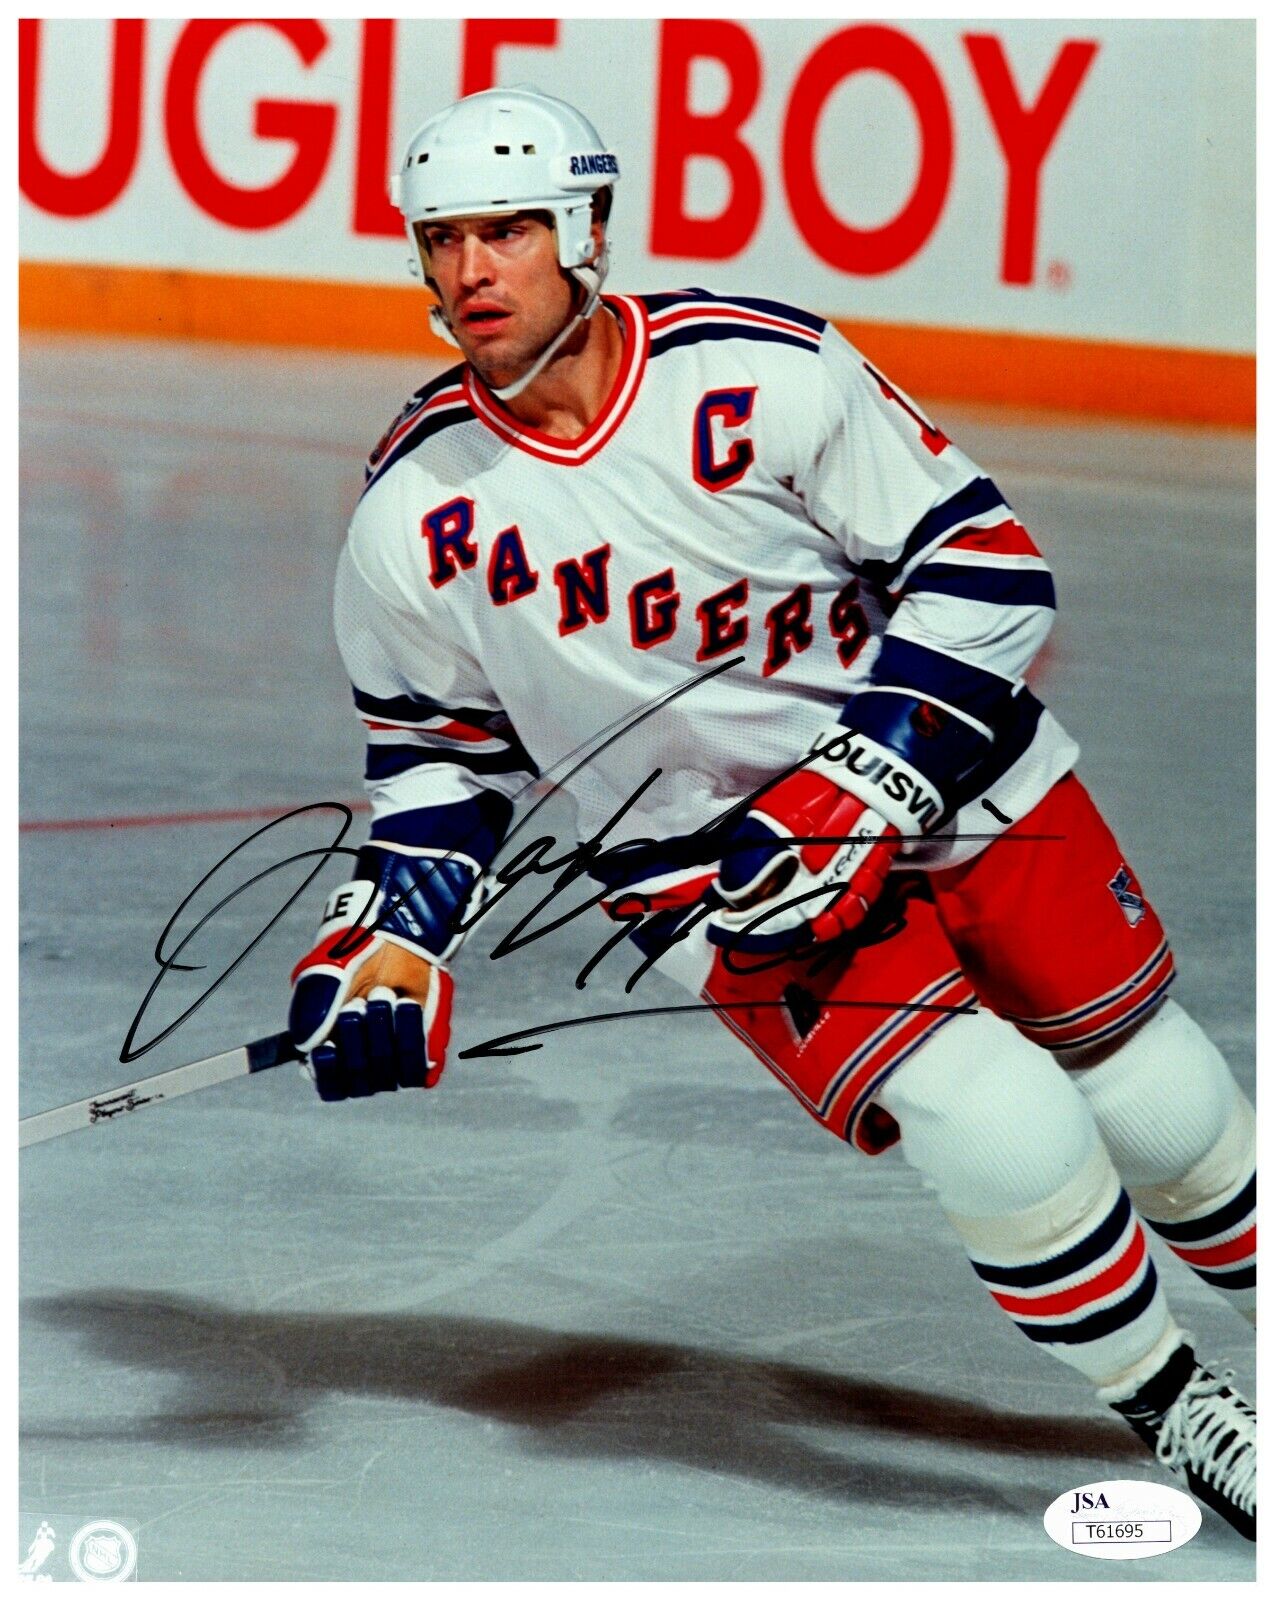 Mark Messier New York Rangers 94 Cup Autographed Signed 8x10 Color Photo JSA COA